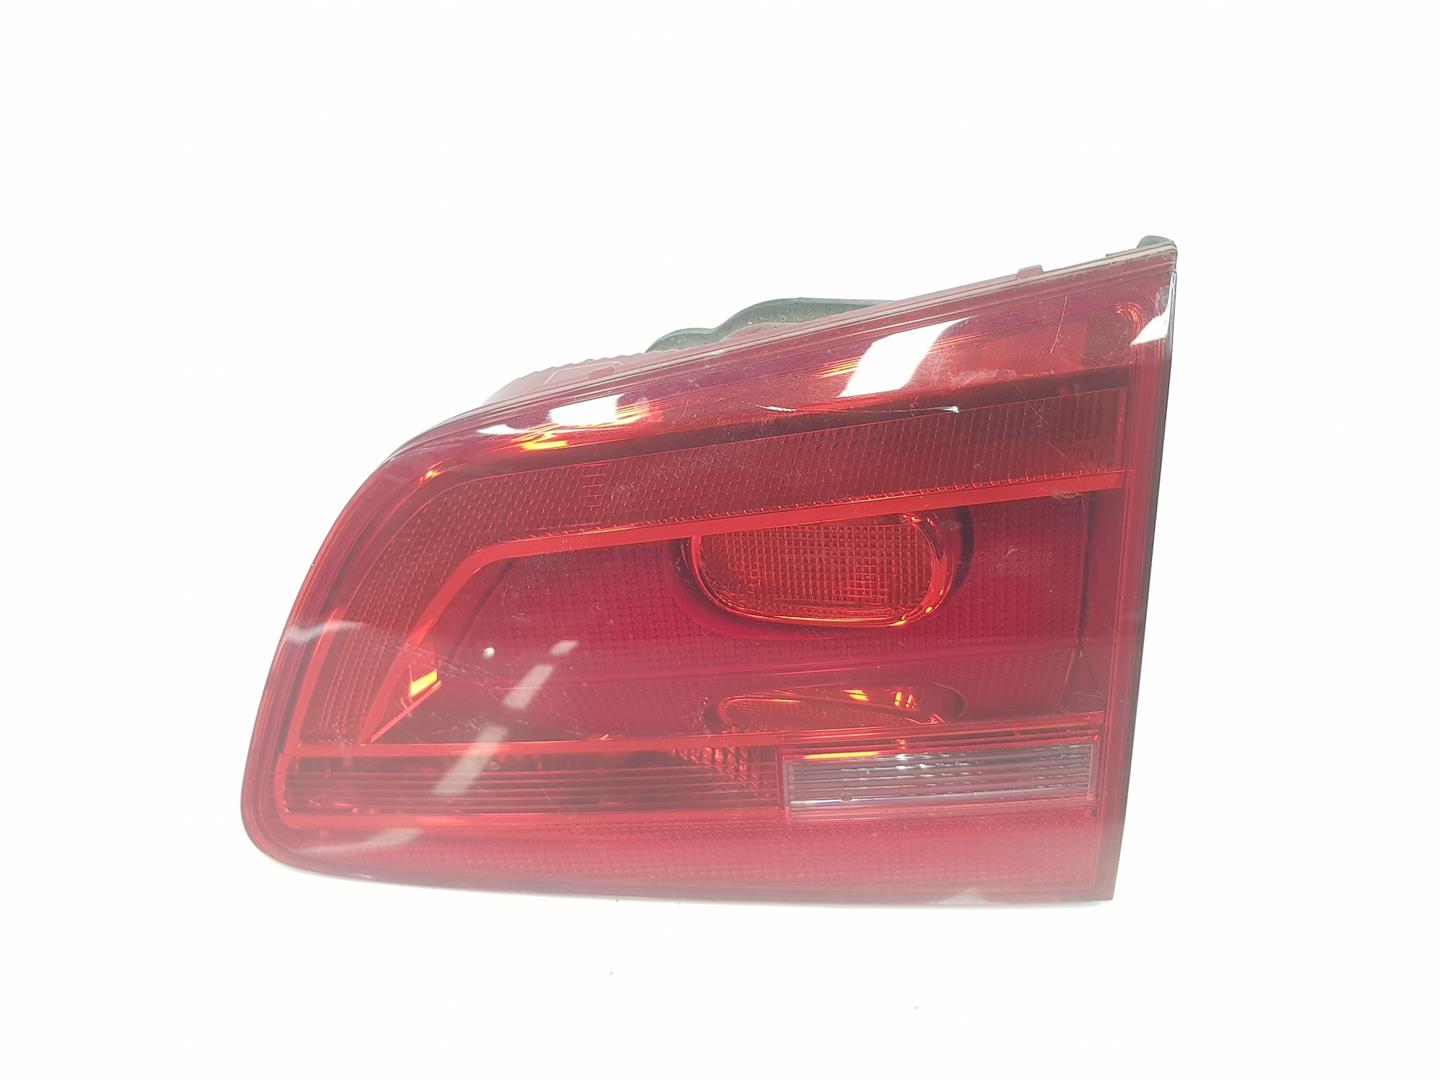 VOLKSWAGEN Touran 1 generation (2003-2015) Rear Right Taillight Lamp 1T0945094A, 1T0945094A 24224426